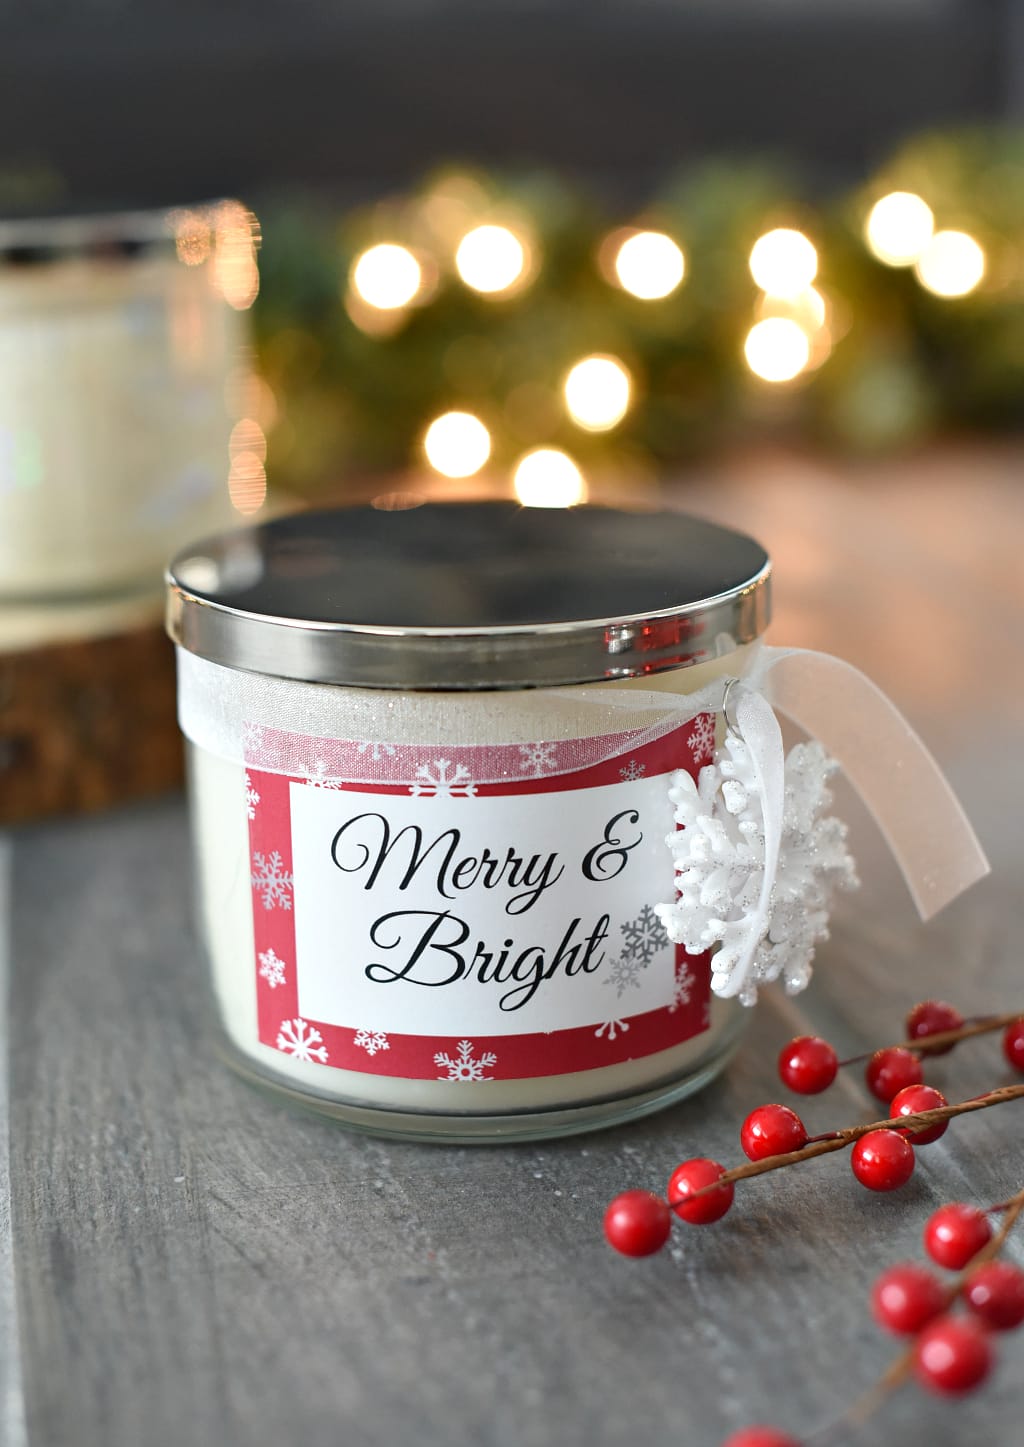 DIY Christmas candle gift idea! If you are looking for the perfect gift idea this year, we have it! #DIYChristmasgift #Christmas #Simplegiftidea